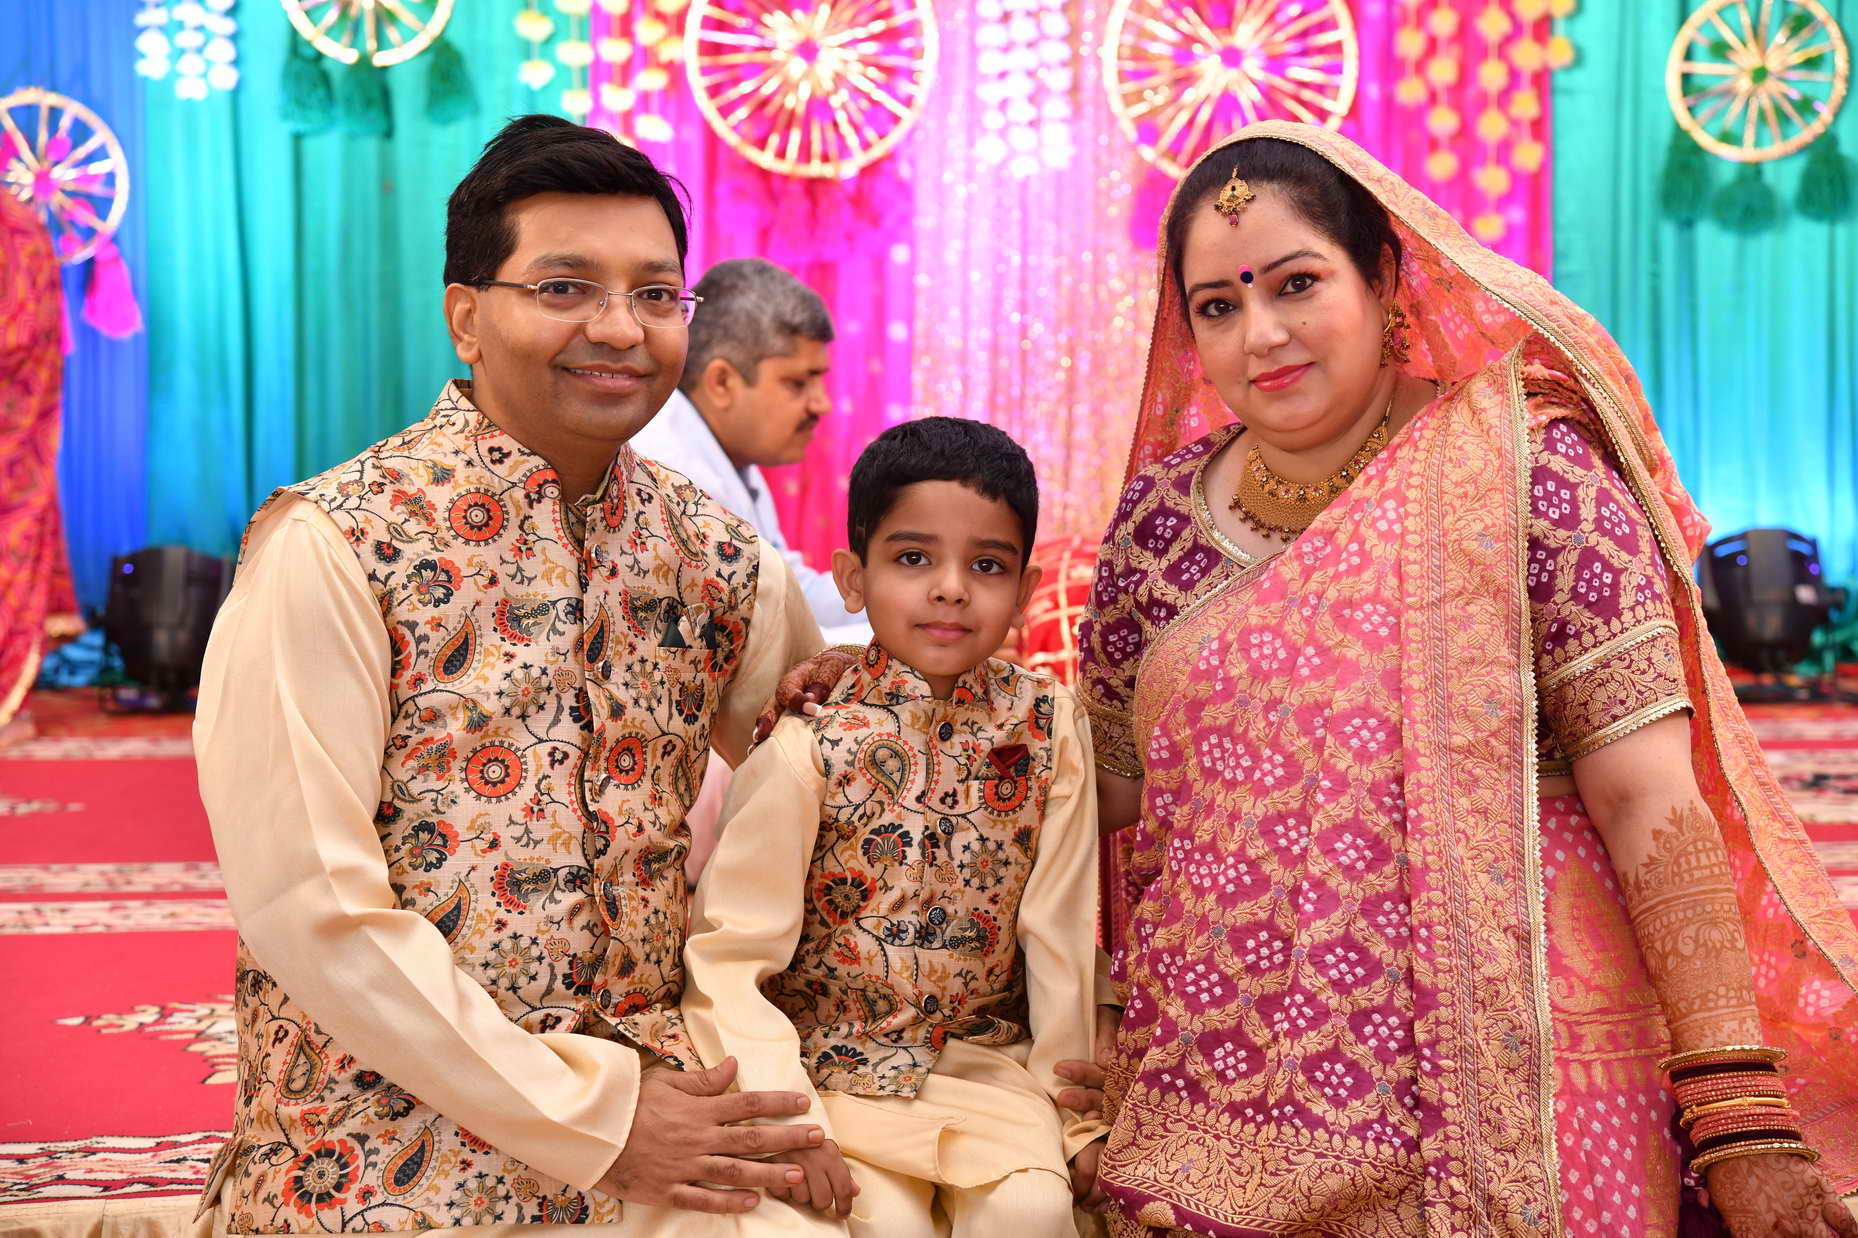 Yeshwanth and his wife, Nupur, and son, Hrrida, at a wedding in Bangalore, India.